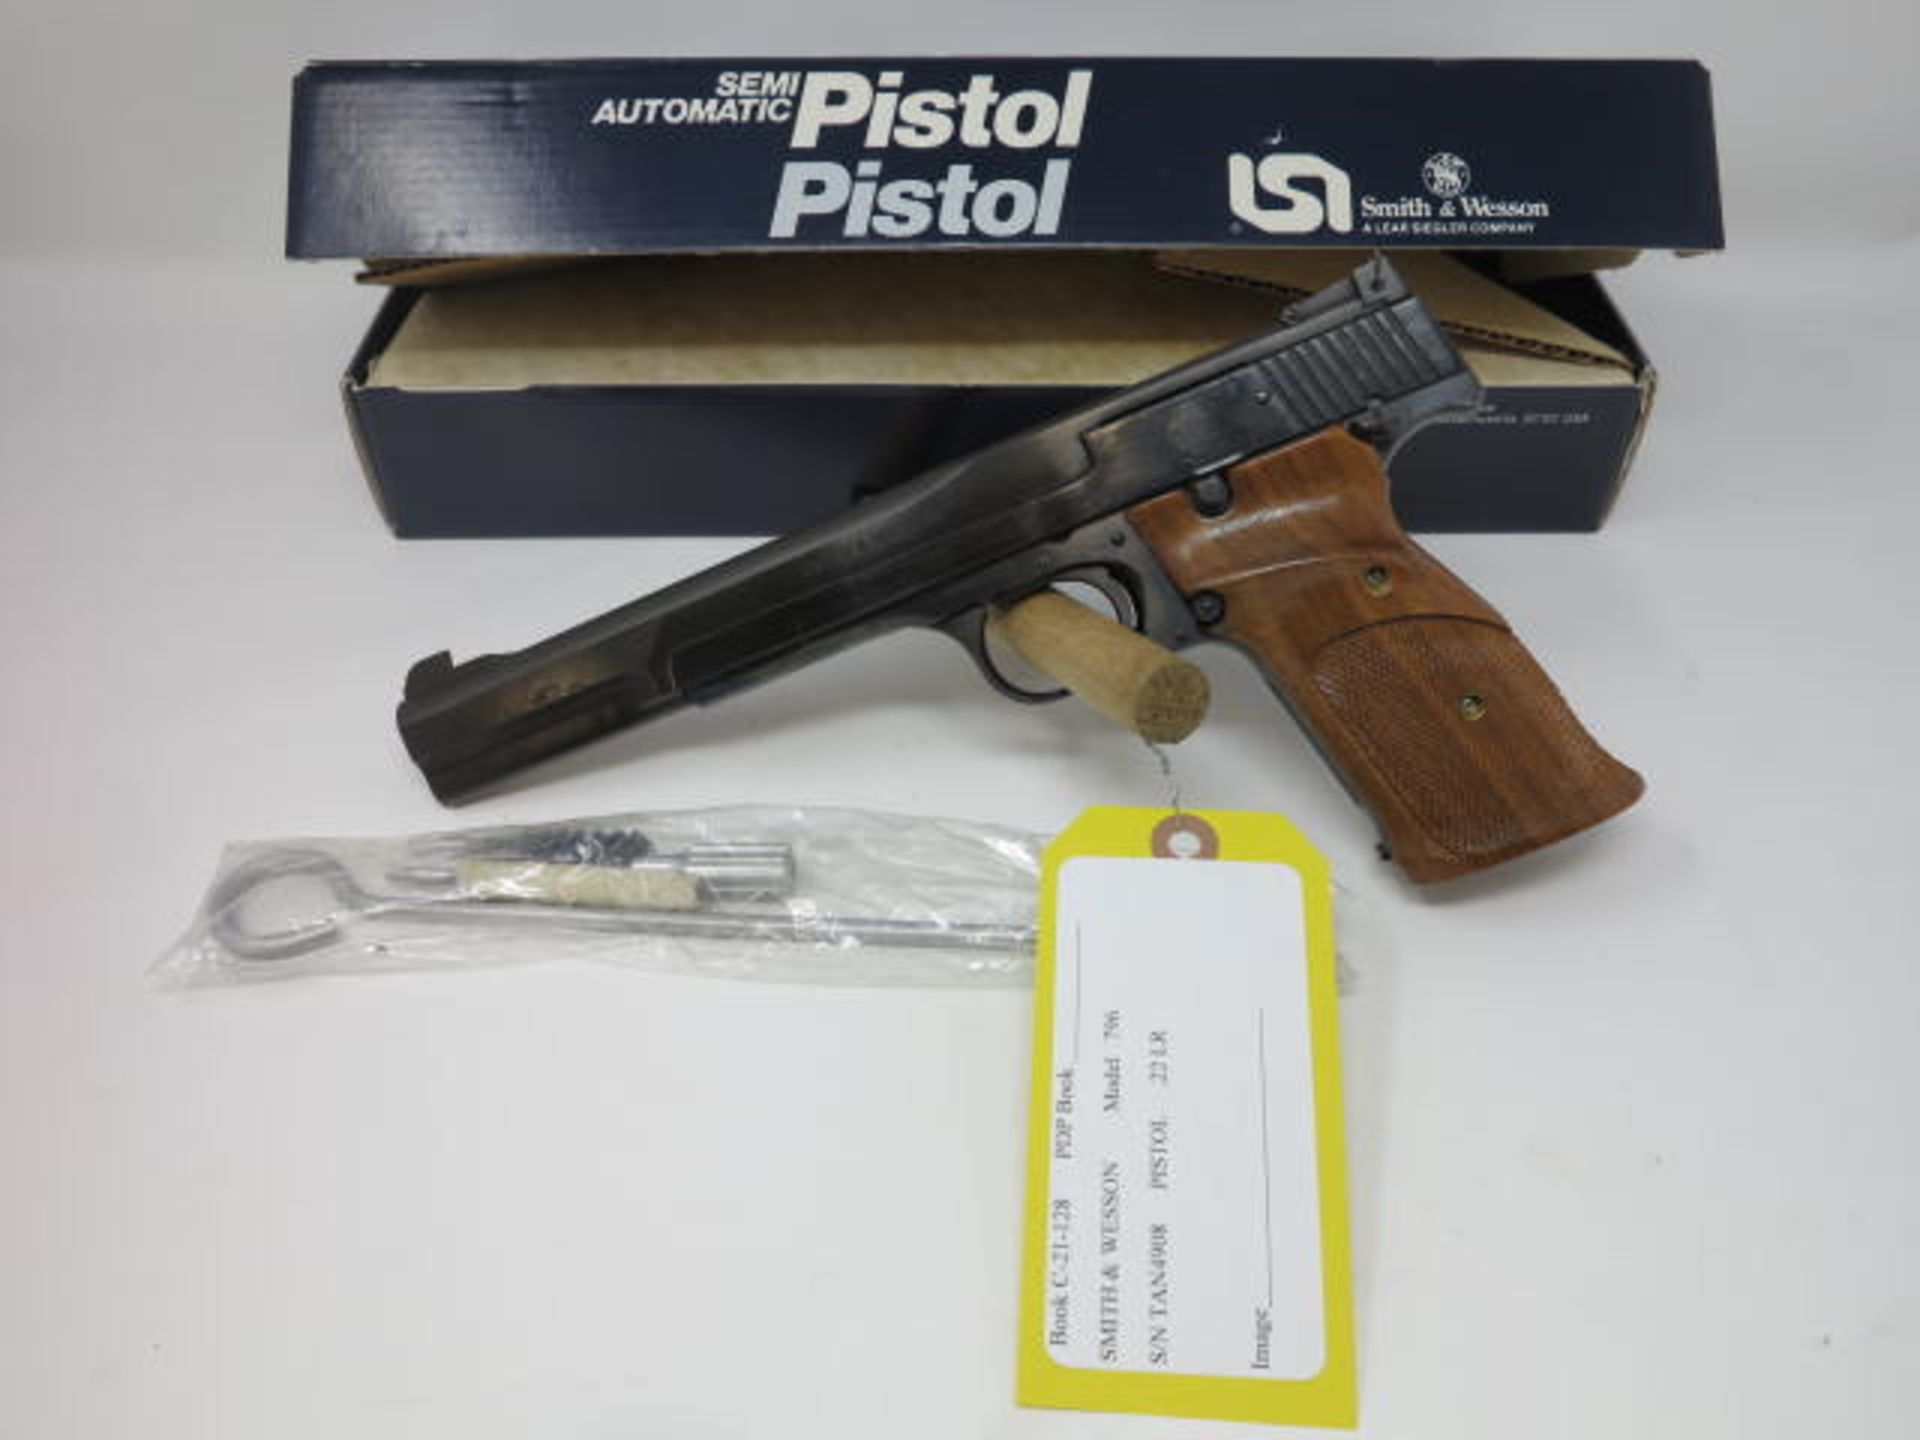 Smith & Wesson .22LR, Model 796, S/N TAN4908, New in Box with Cleaning Rod